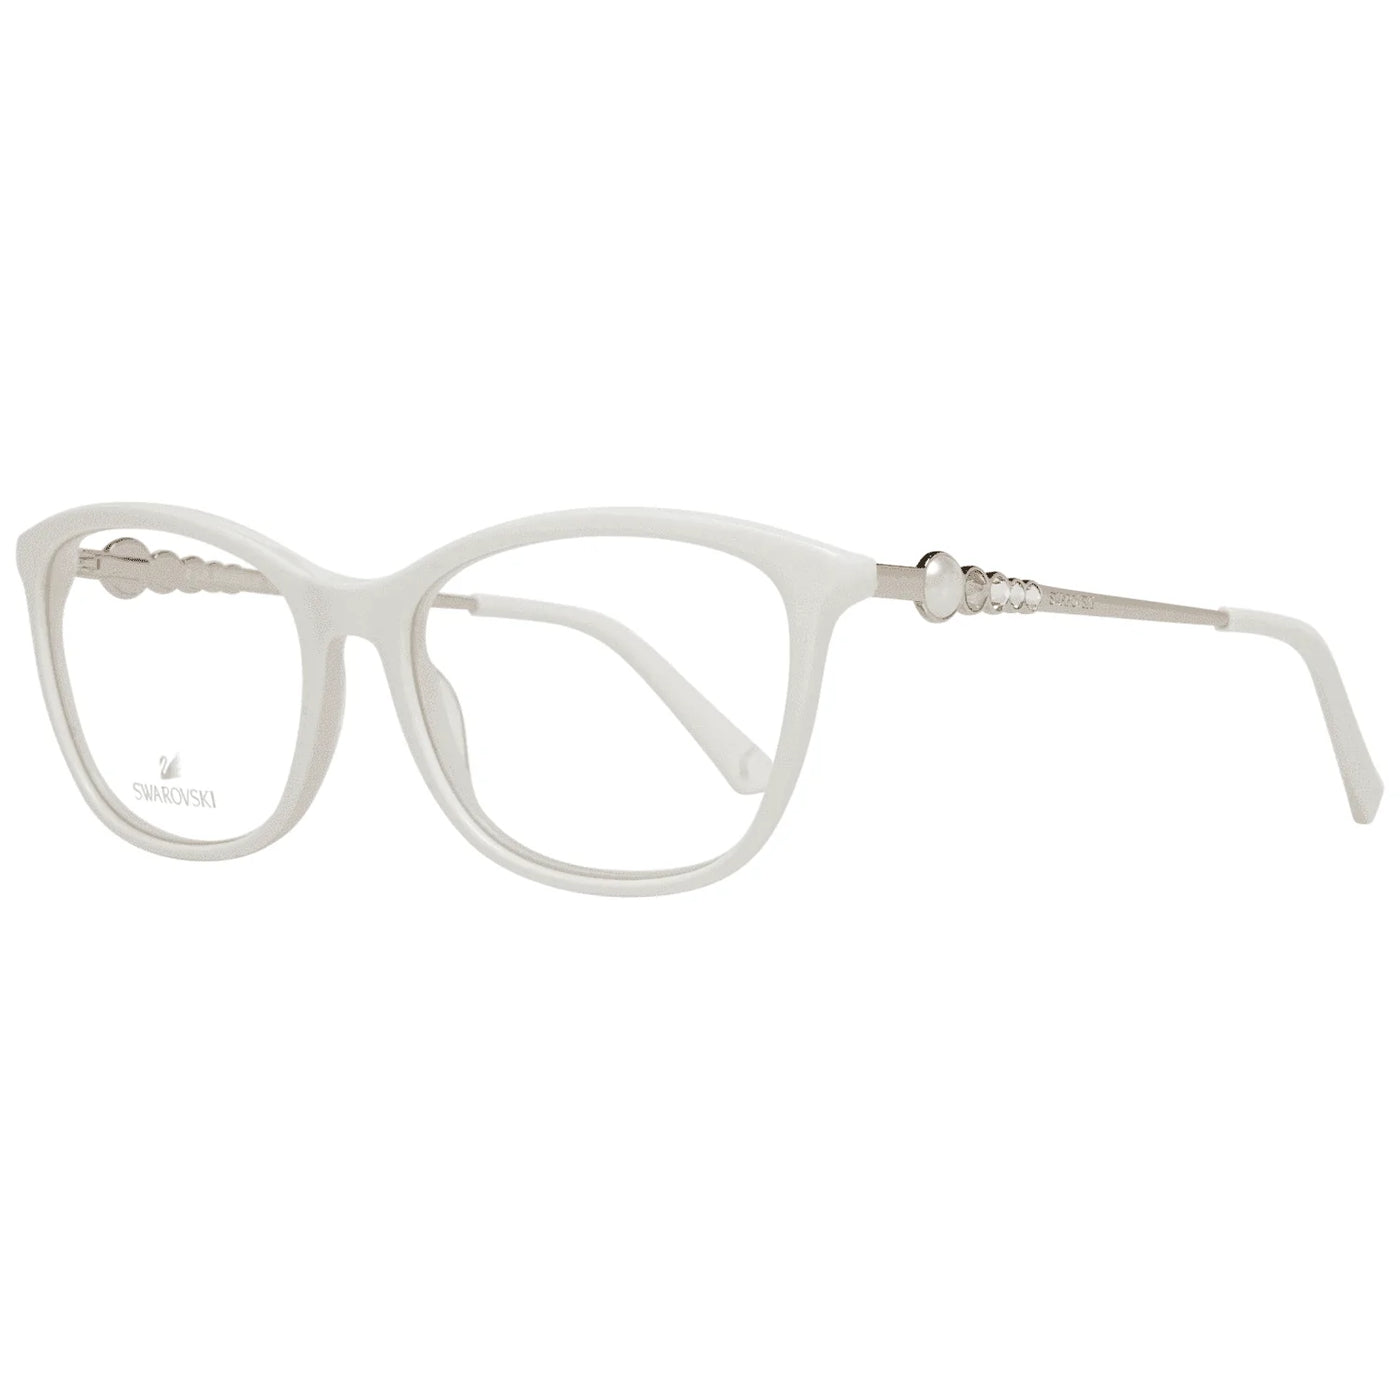 Swarovski Women Optical Frames #women, Brand_Swarovski, Category_Accessories, feed-agegroup-adult, feed-color-white, feed-gender-female, feed-size-OS, Frames for Women - Frames, Gender_Women, Season_Spring/Summer, Subcategory_Eyeglasses, White at SEYMAYKA